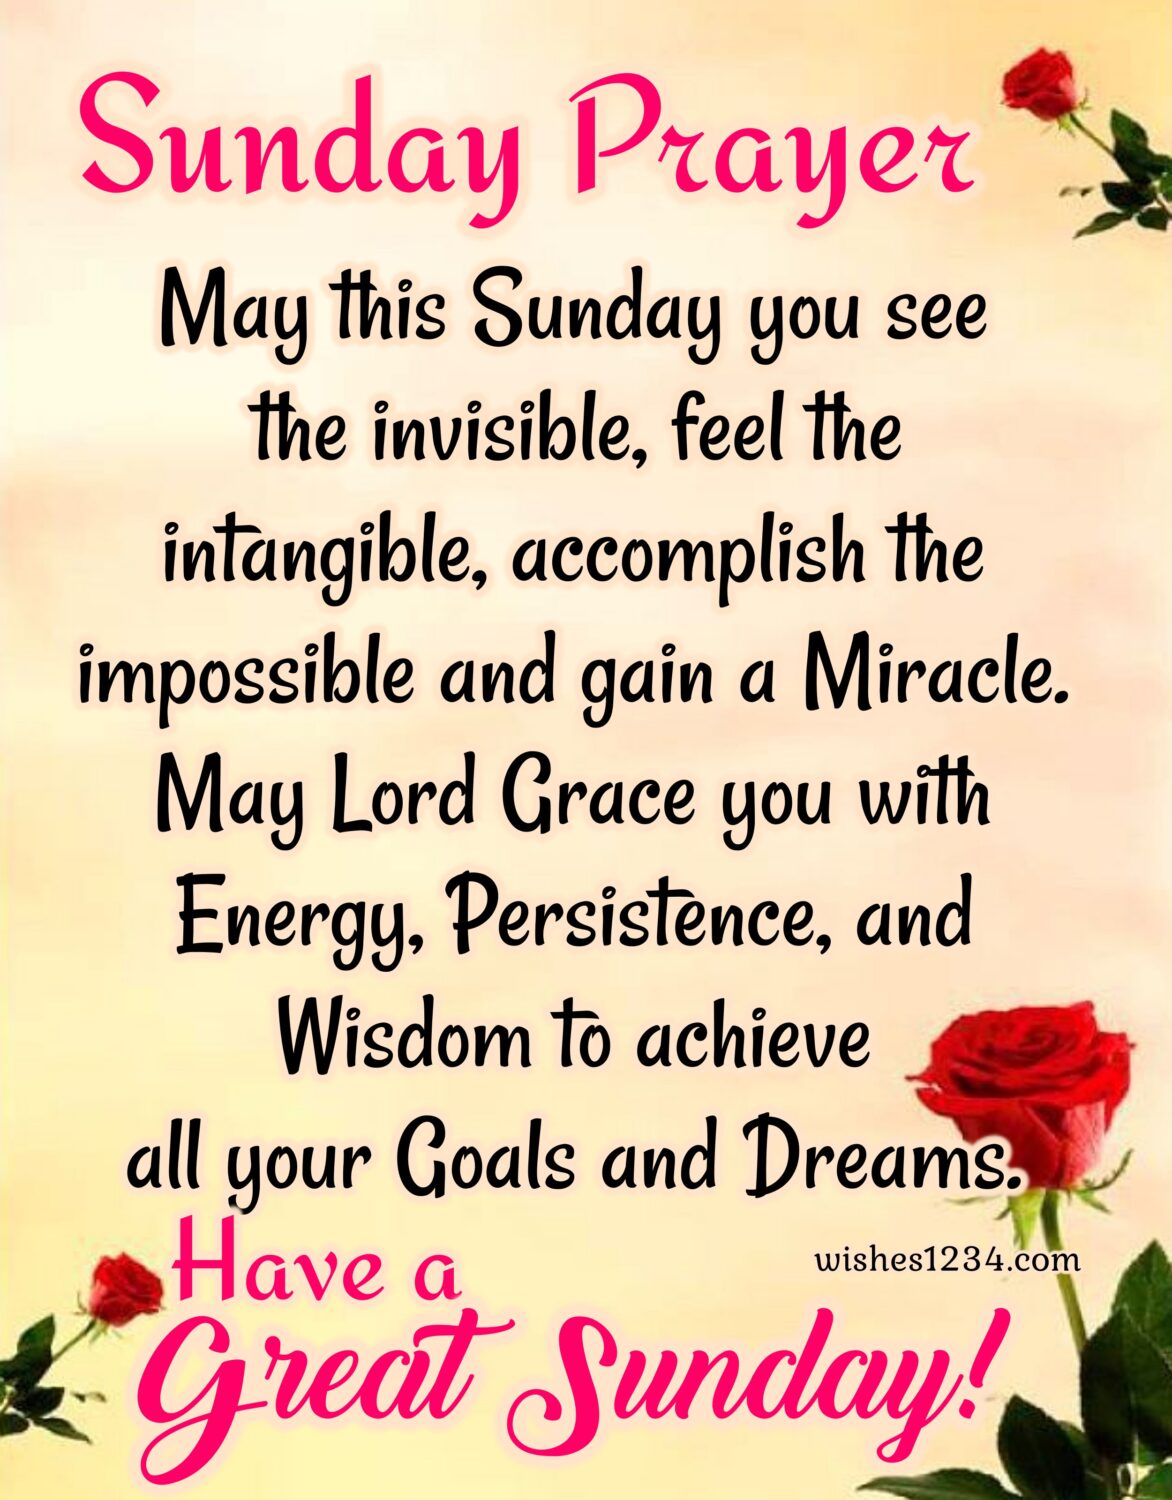 Sunday prayer with red roses background, Happy Sunday Quotes.